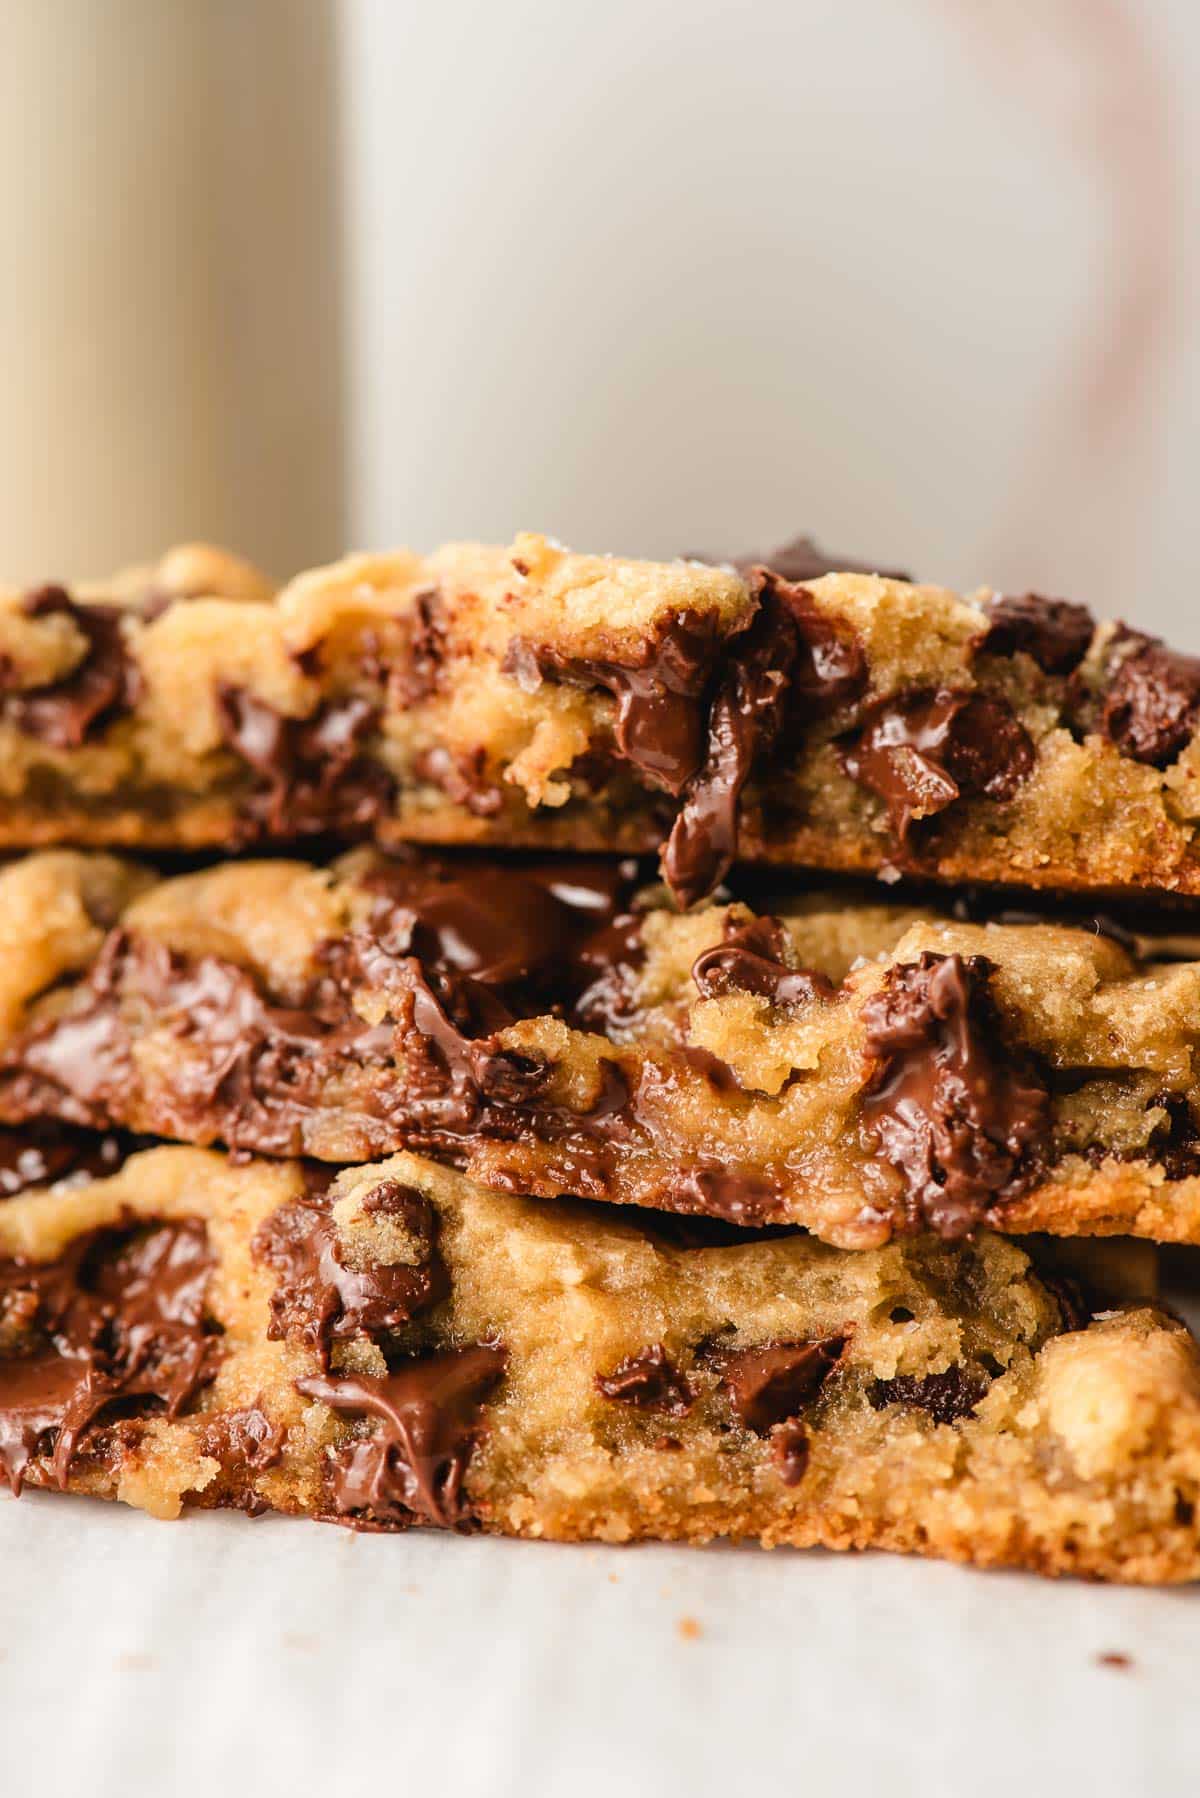 Stack of chocolate chip cookies broken in half to reveal the melty chocolate chips.